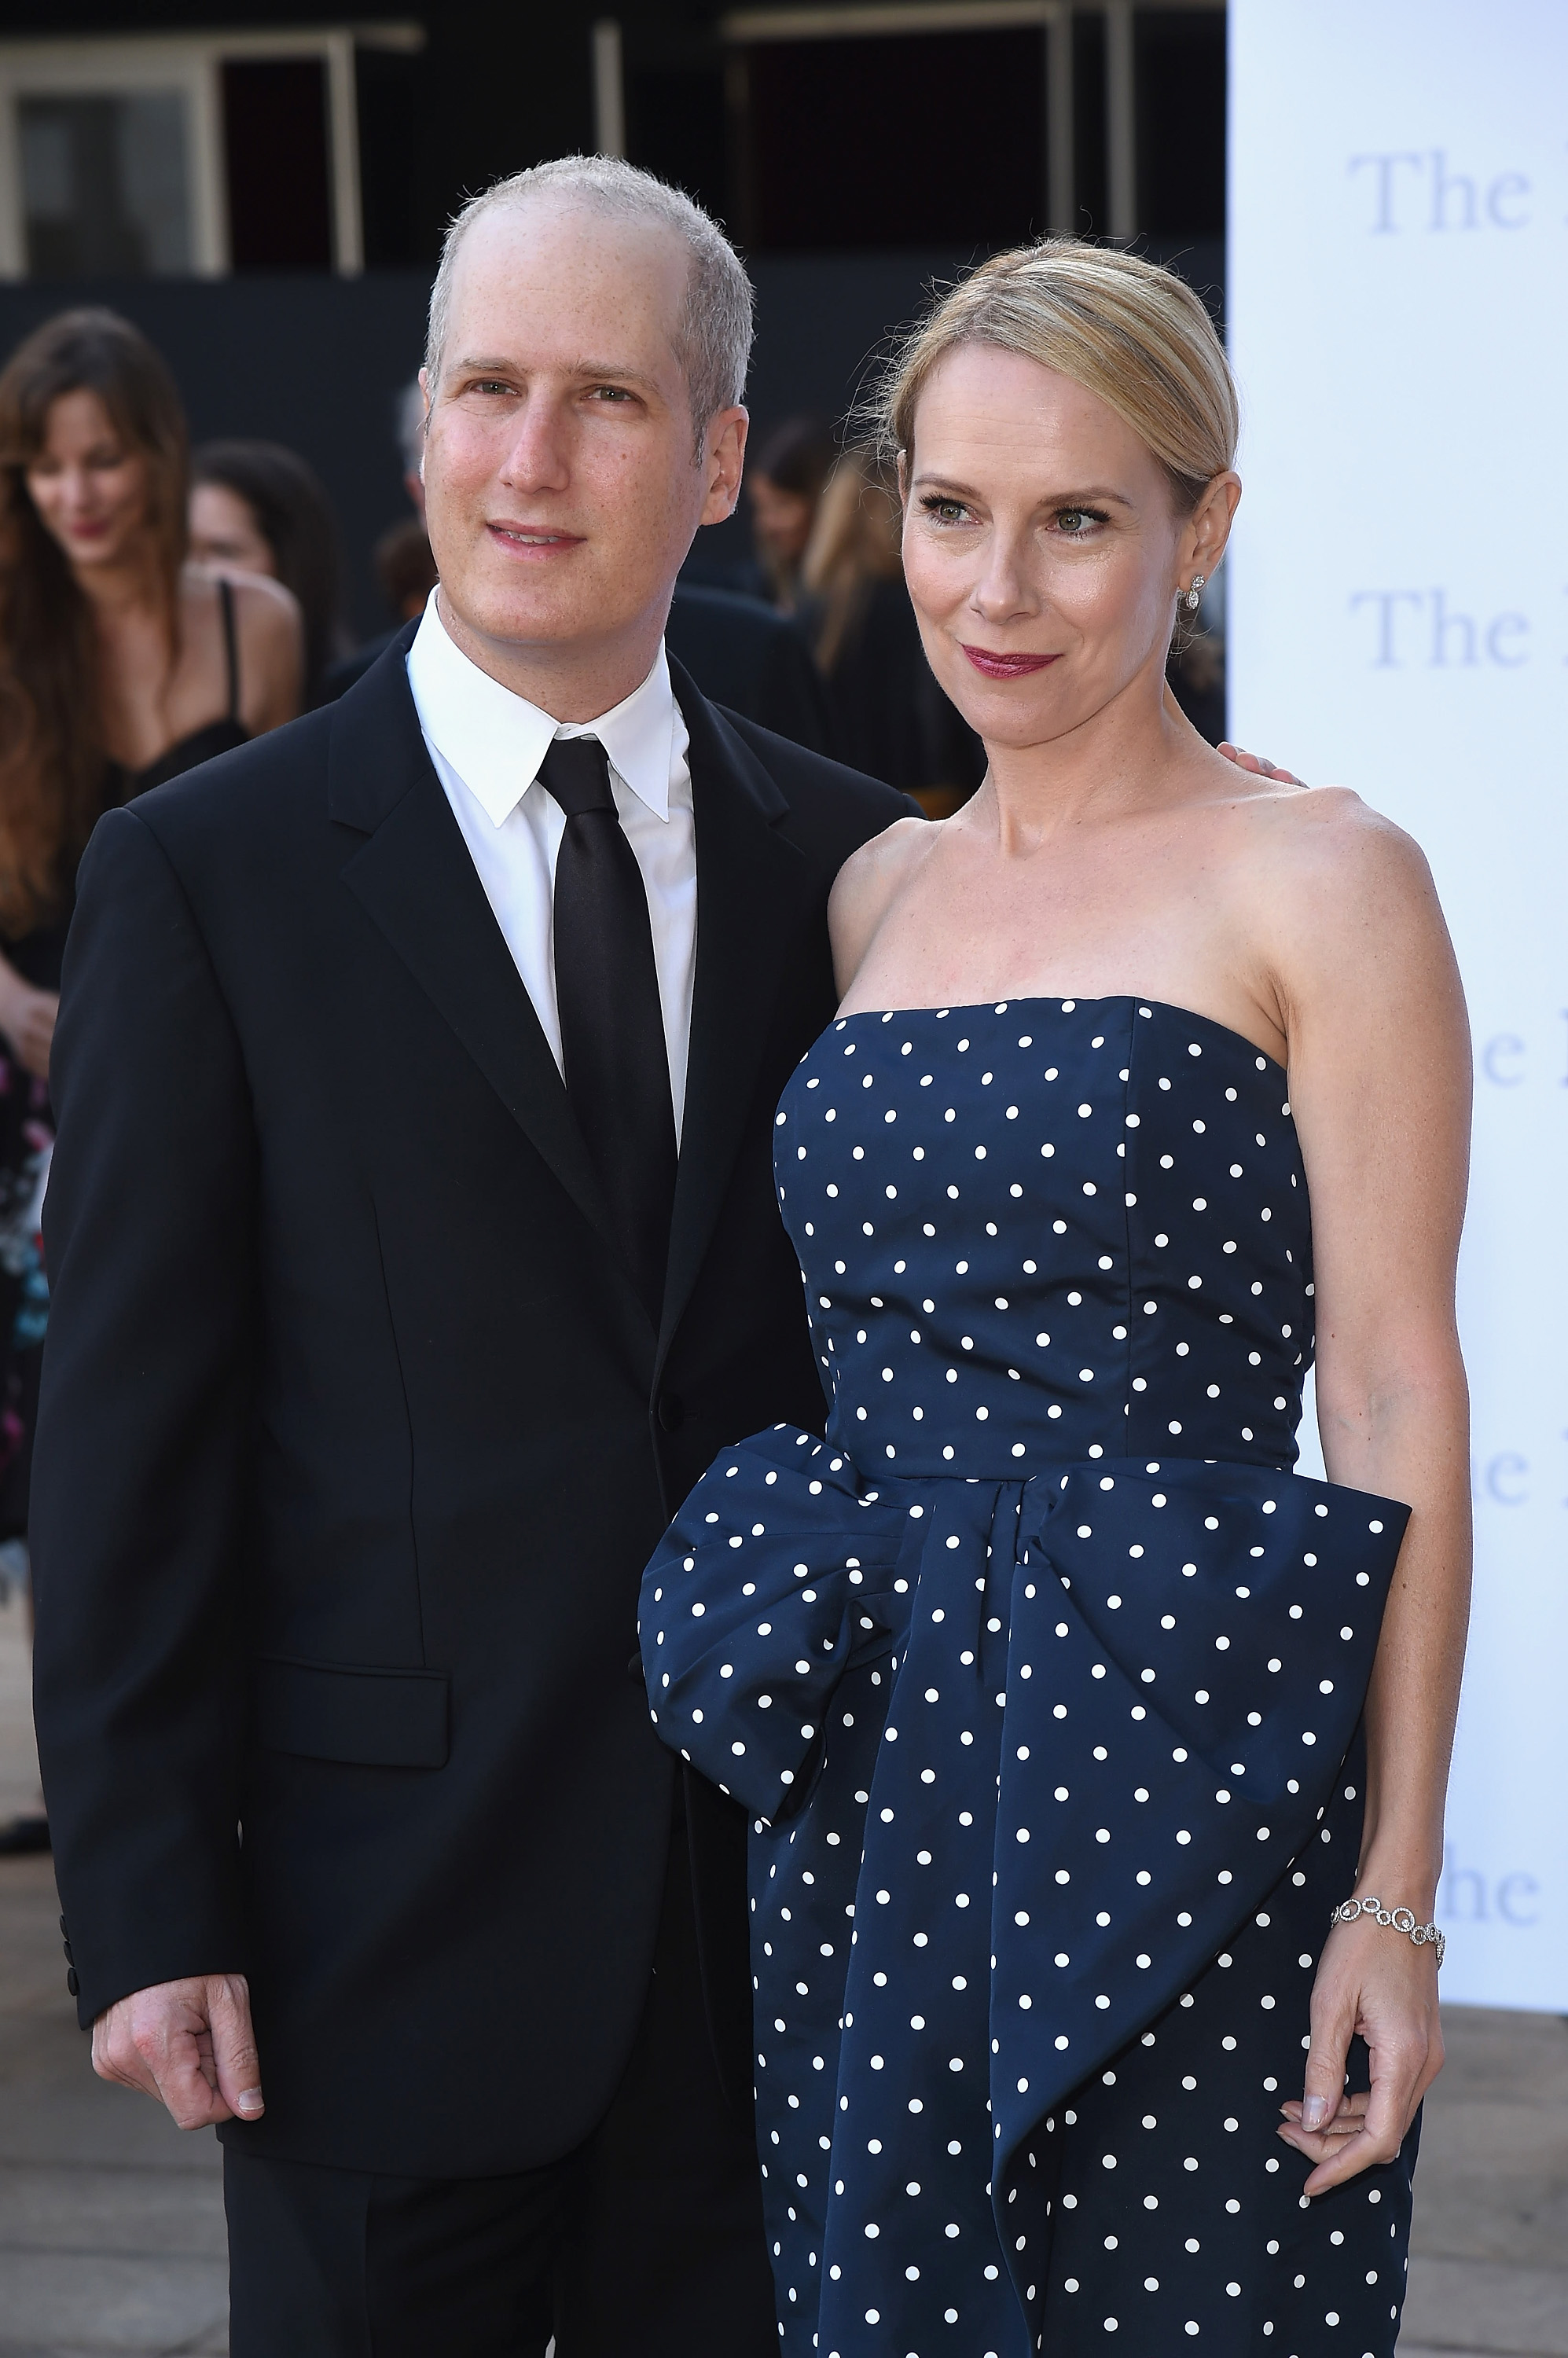 Eric Slovin and Amy Ryan at the season opening of "The Marriage of Figaro" on September 22, 2014, in New York City. | Source: Getty Images